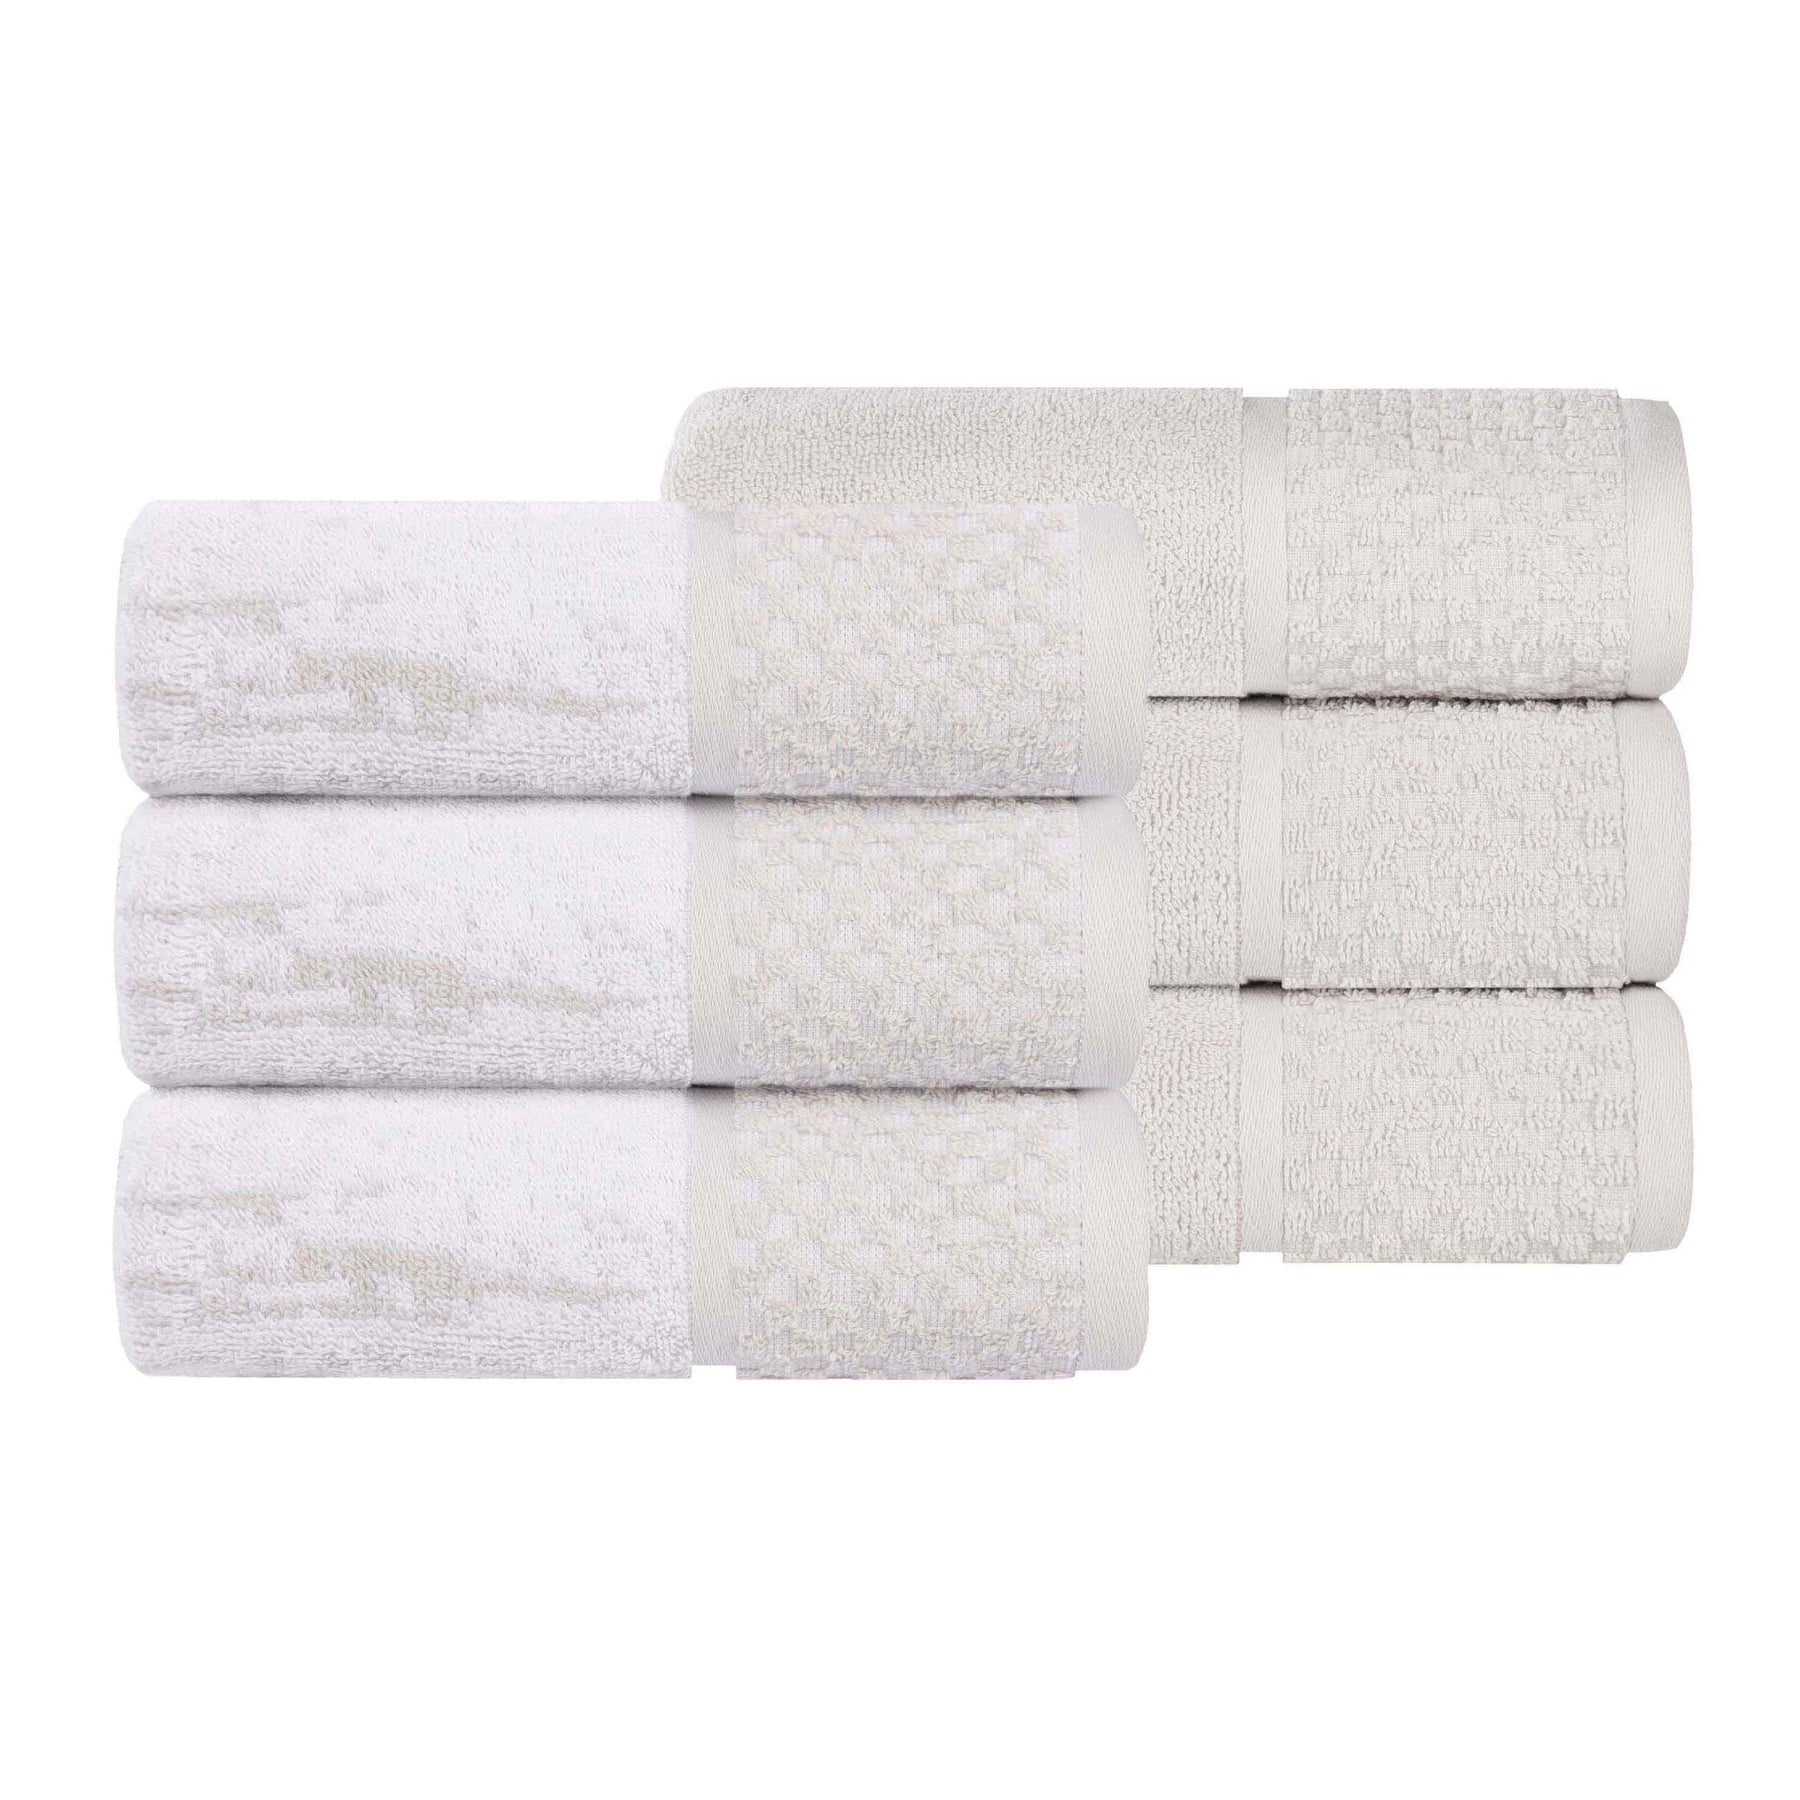 Lodie Cotton Jacquard Solid and Two-Toned Hand Towel - Stone-White